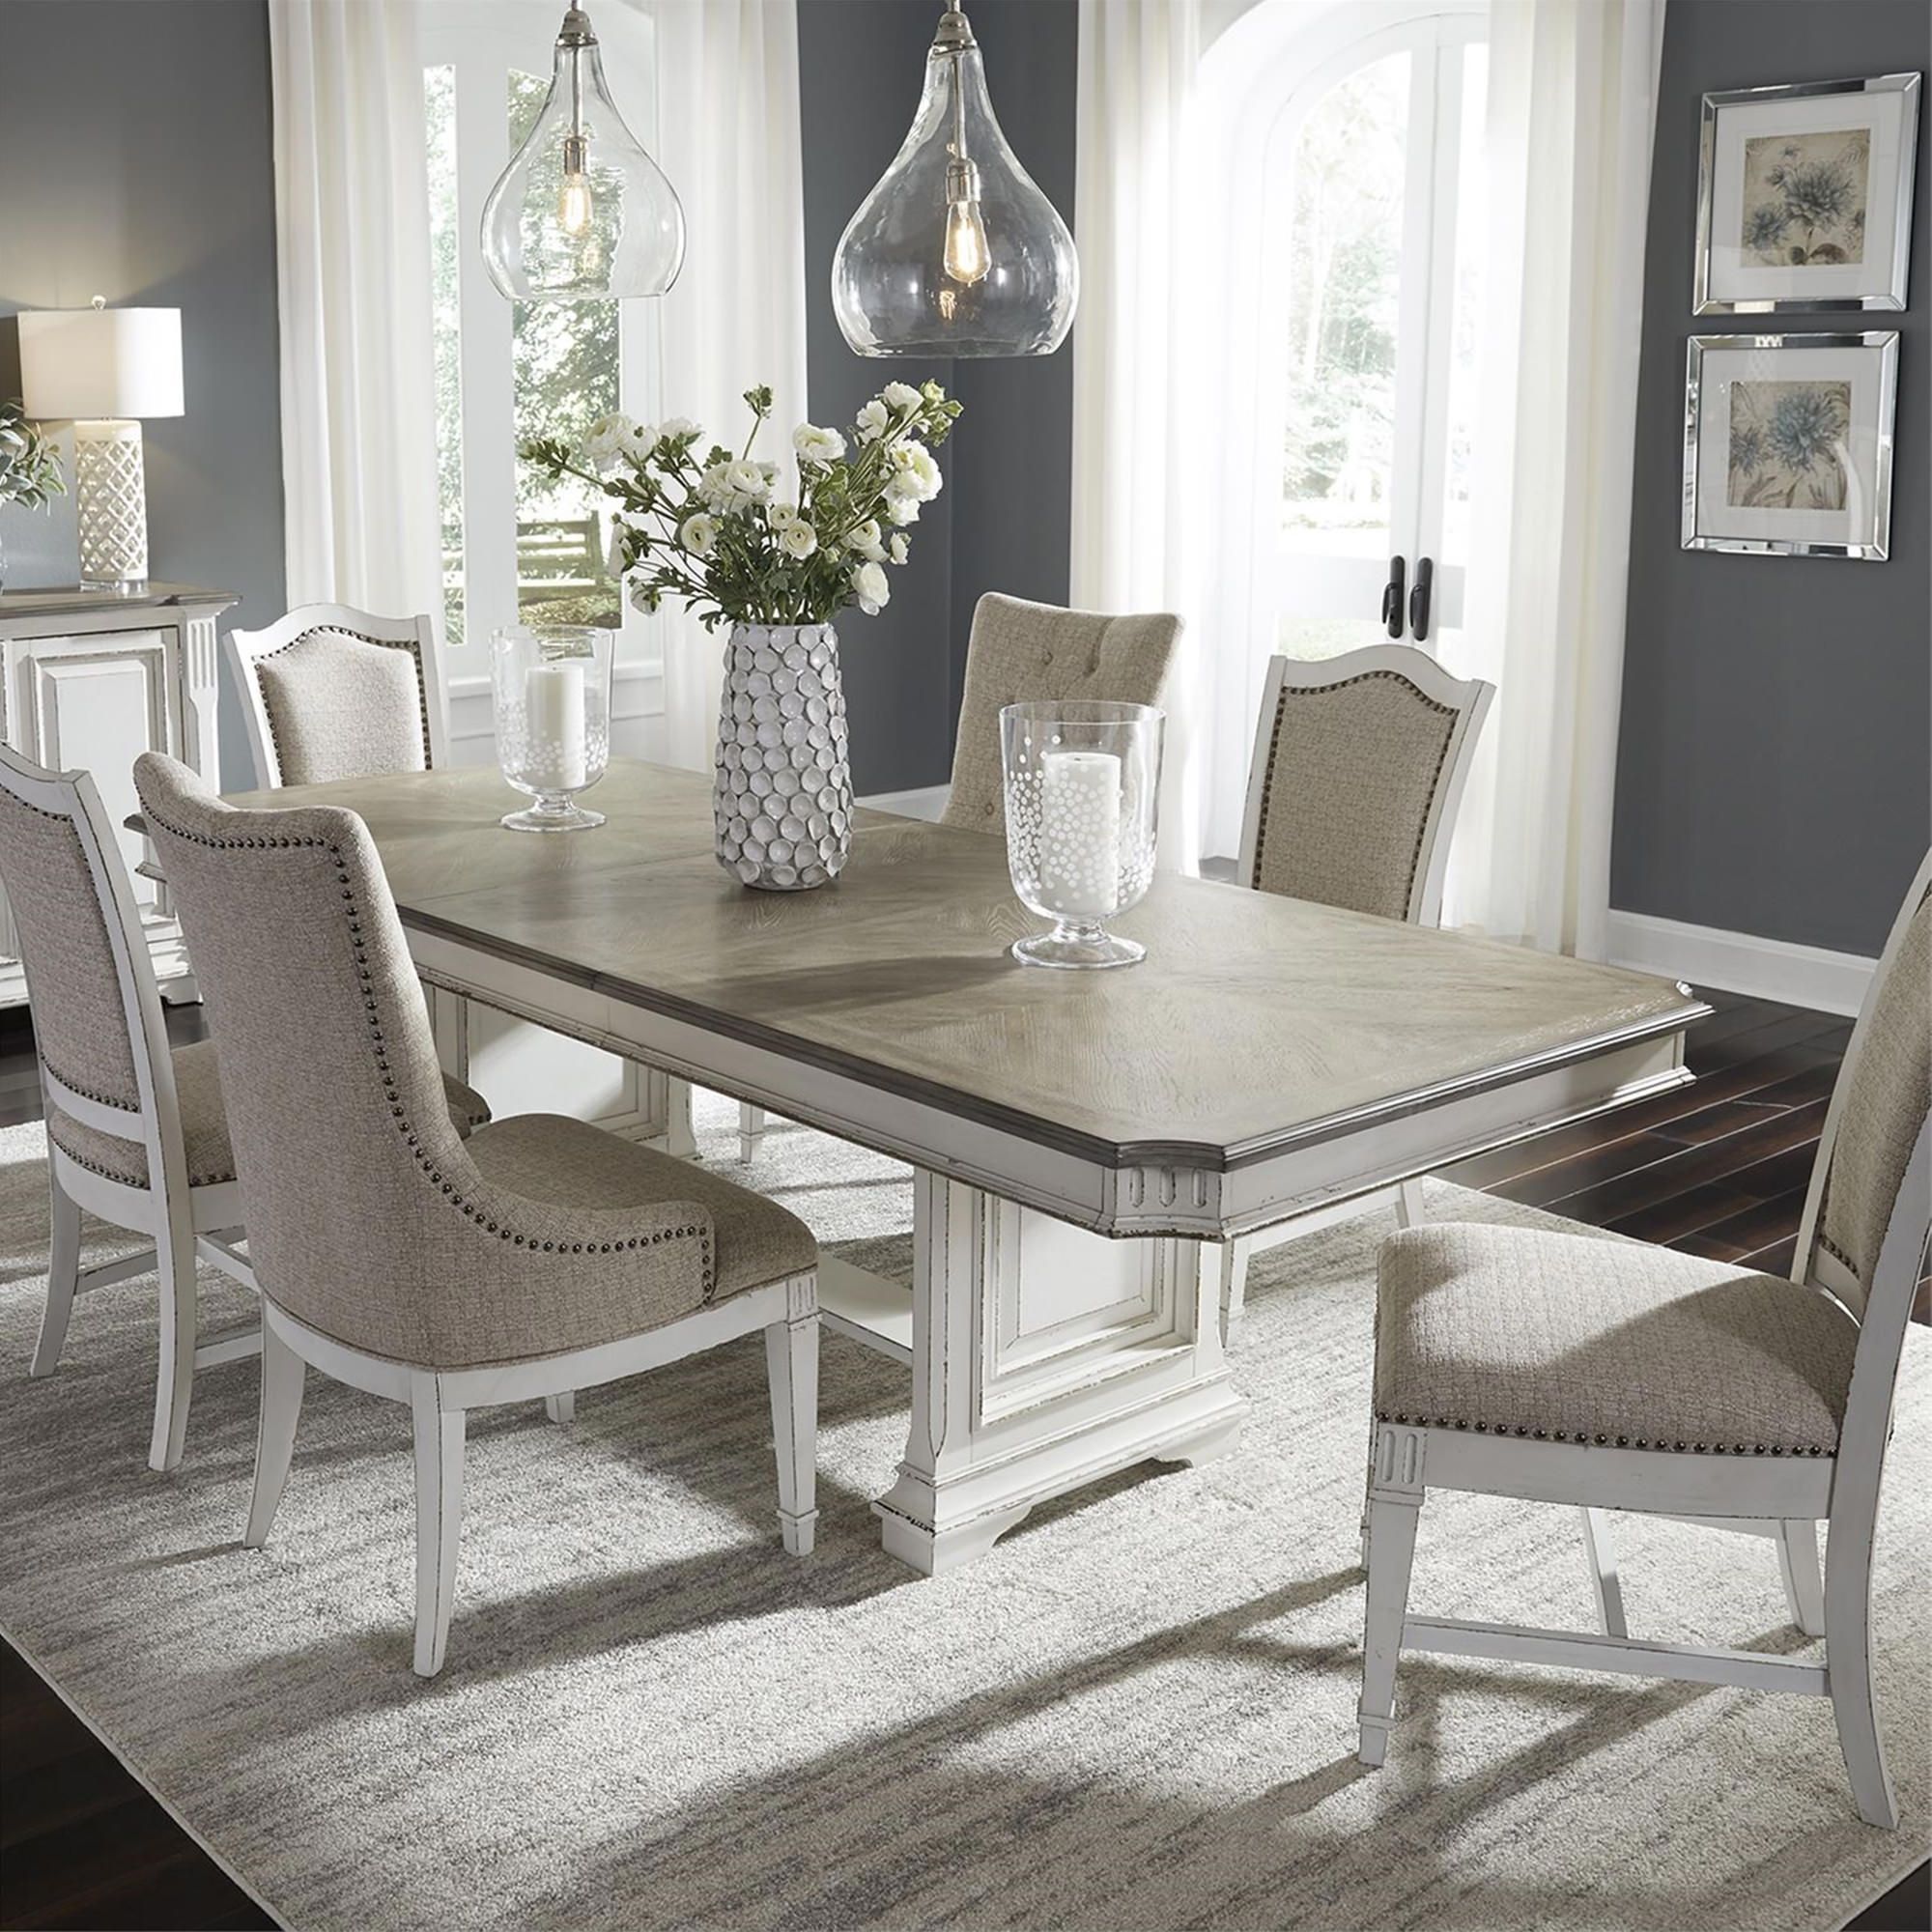 Abbey Park 7 Piece Dining Room Table, Bernie And Phyls Dining Room Sets